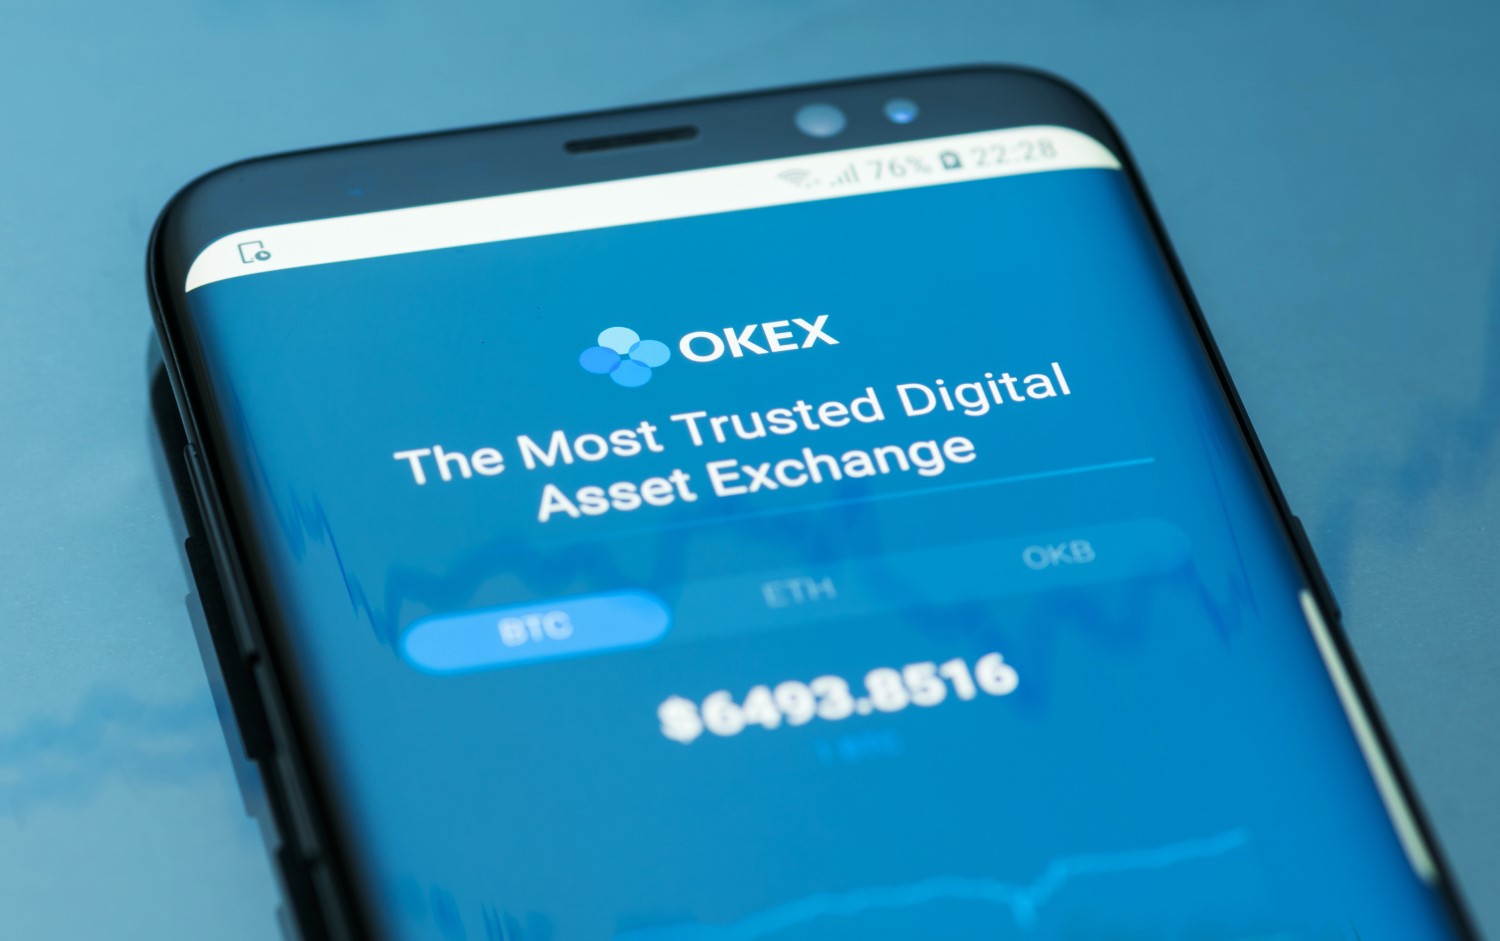 Traders Claim Losses After OKEx Suddenly Settles Bitcoin Cash Contracts